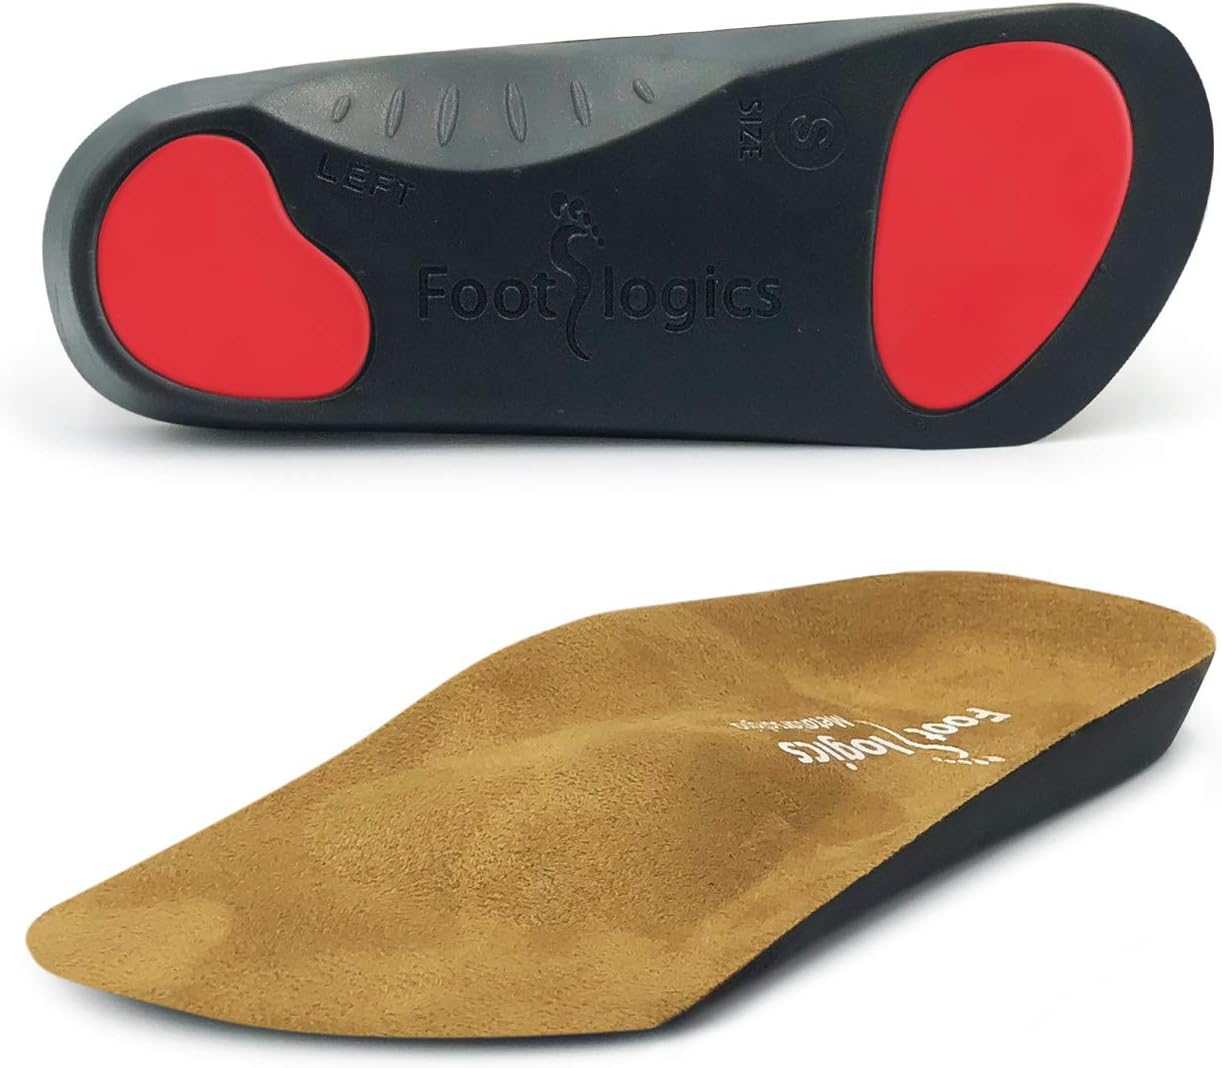 Footlogics 3/4 Length Orthotic Shoe Insoles with Built-in Raise for Ball of Foot Pain, Morton’s Neuroma, Flat Feet - Metatarsalgia